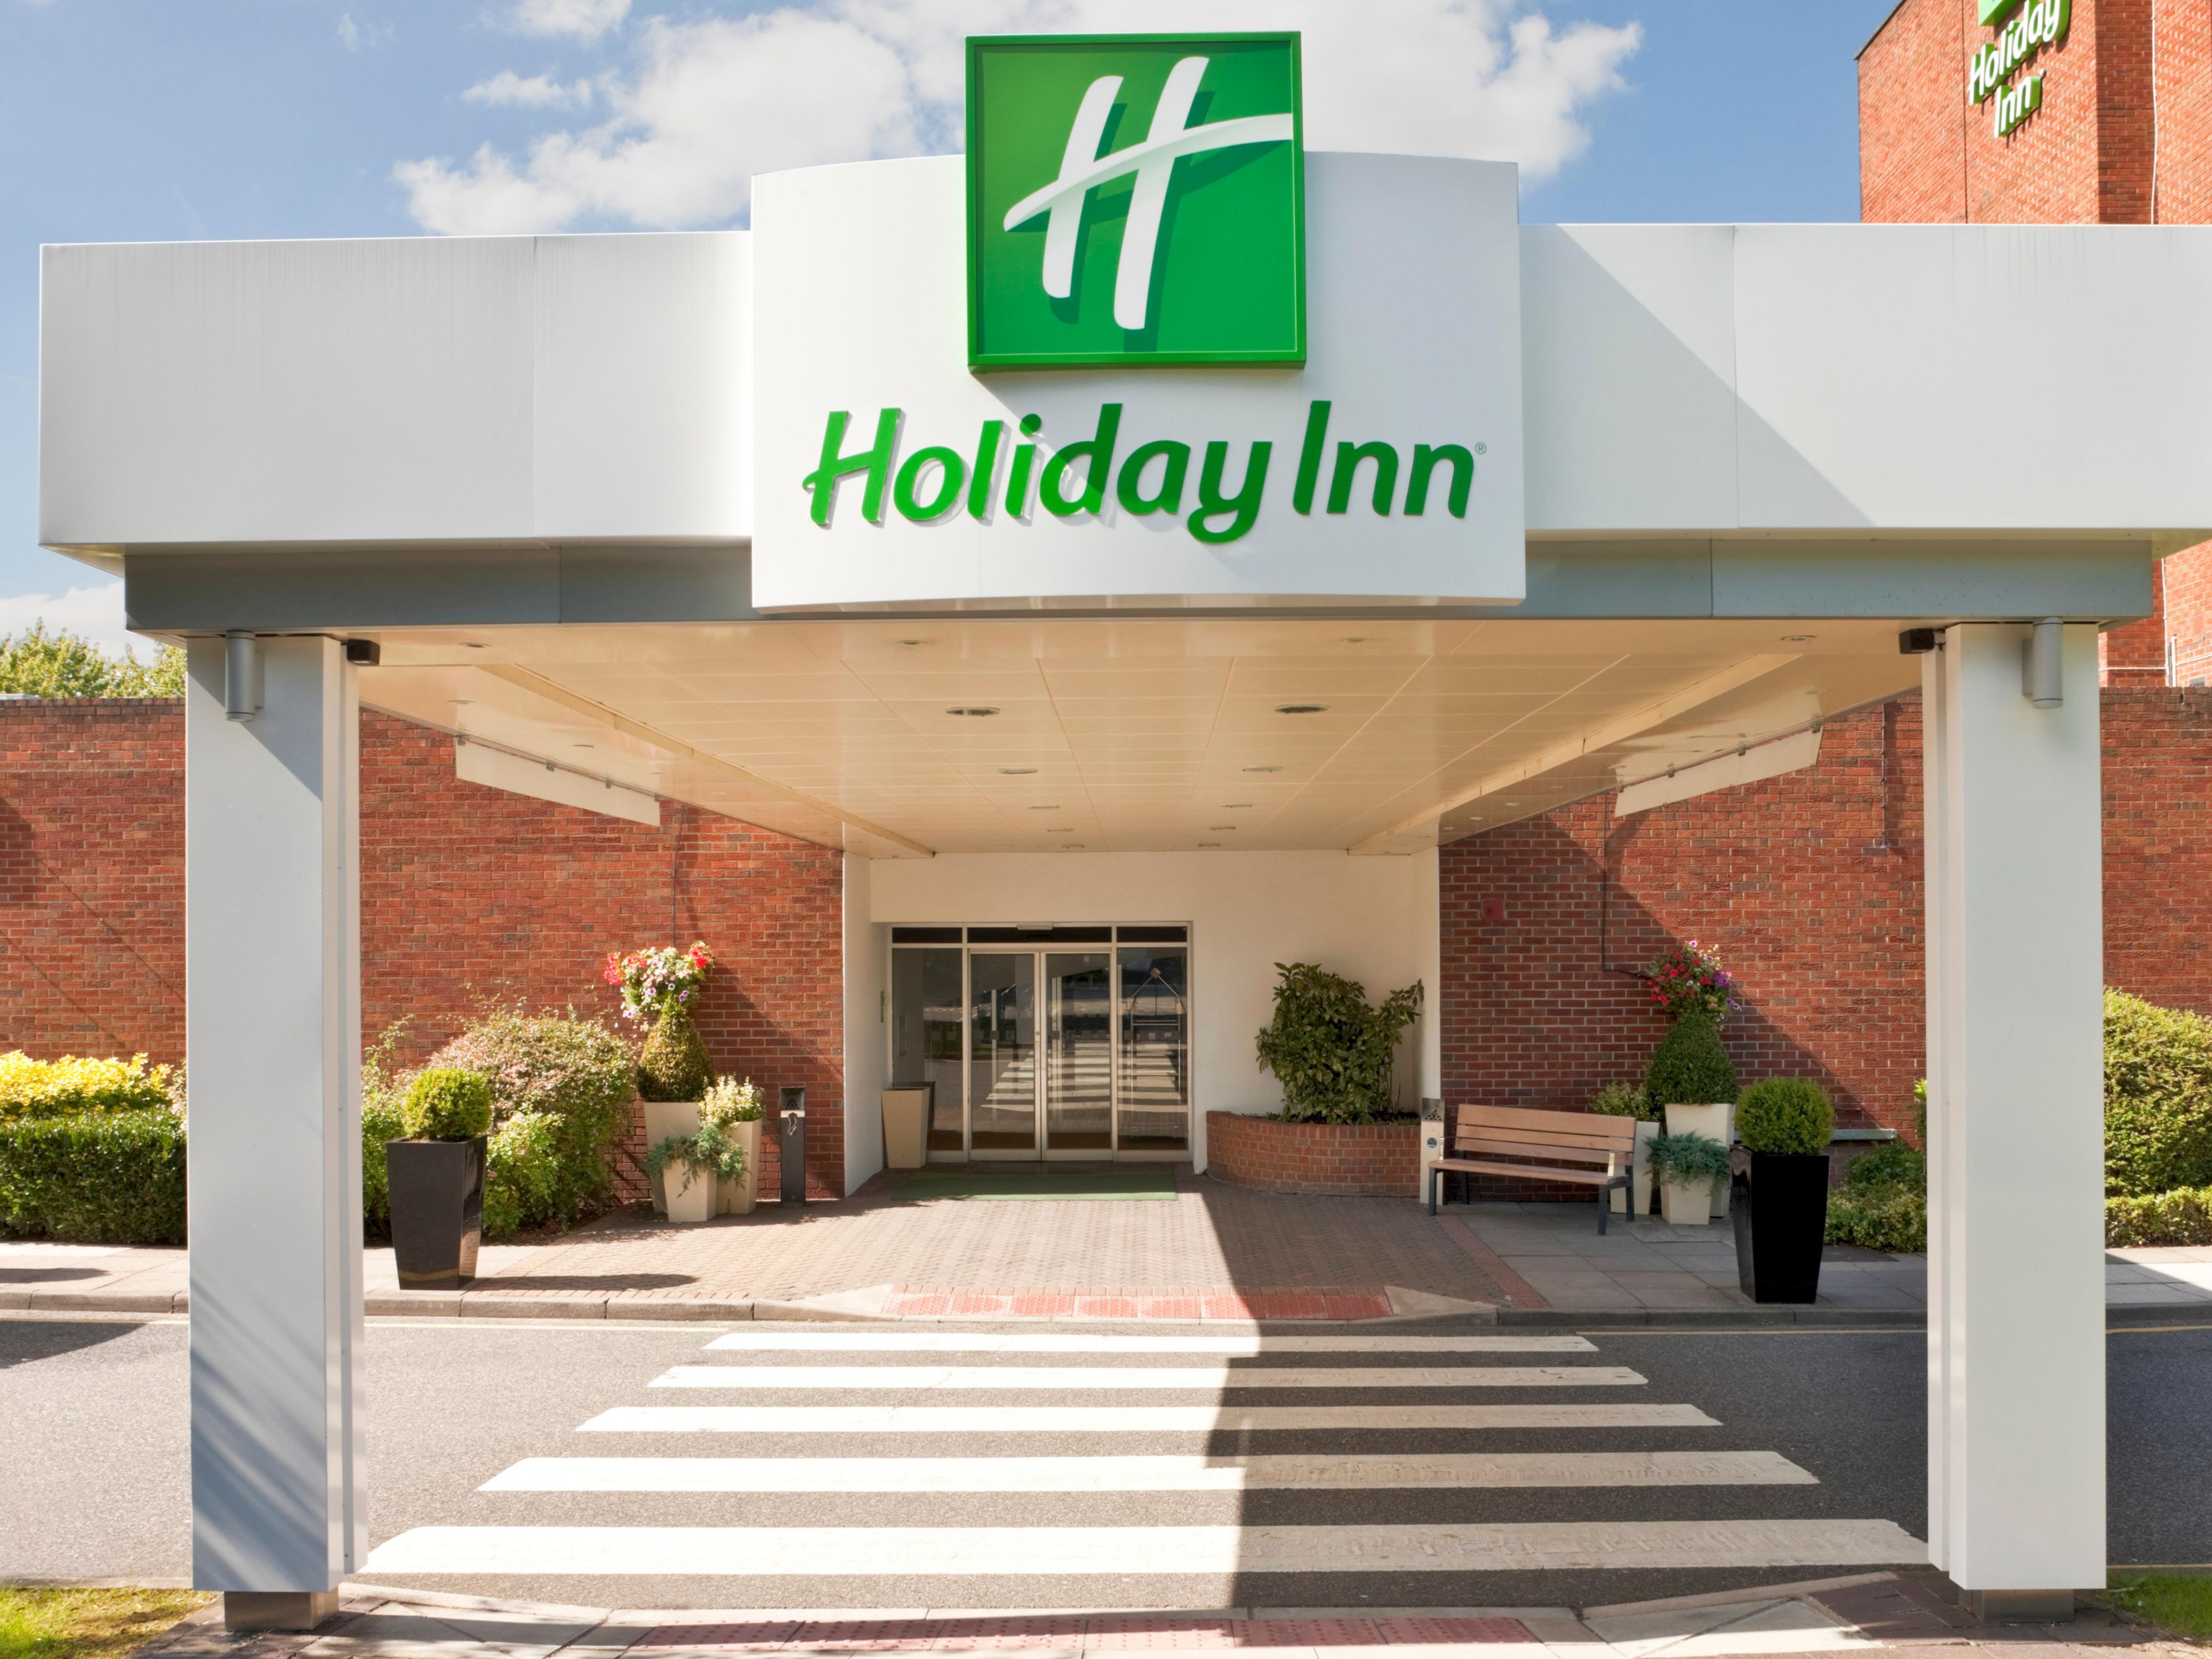 Just click on the link for a chance to visit Holiday Inn Brentwood virtually with a fully interactive, virtual tour. Move through the hotel exploring the bar, restaurant, meeting and event spaces, bedrooms and Spirit Health Club